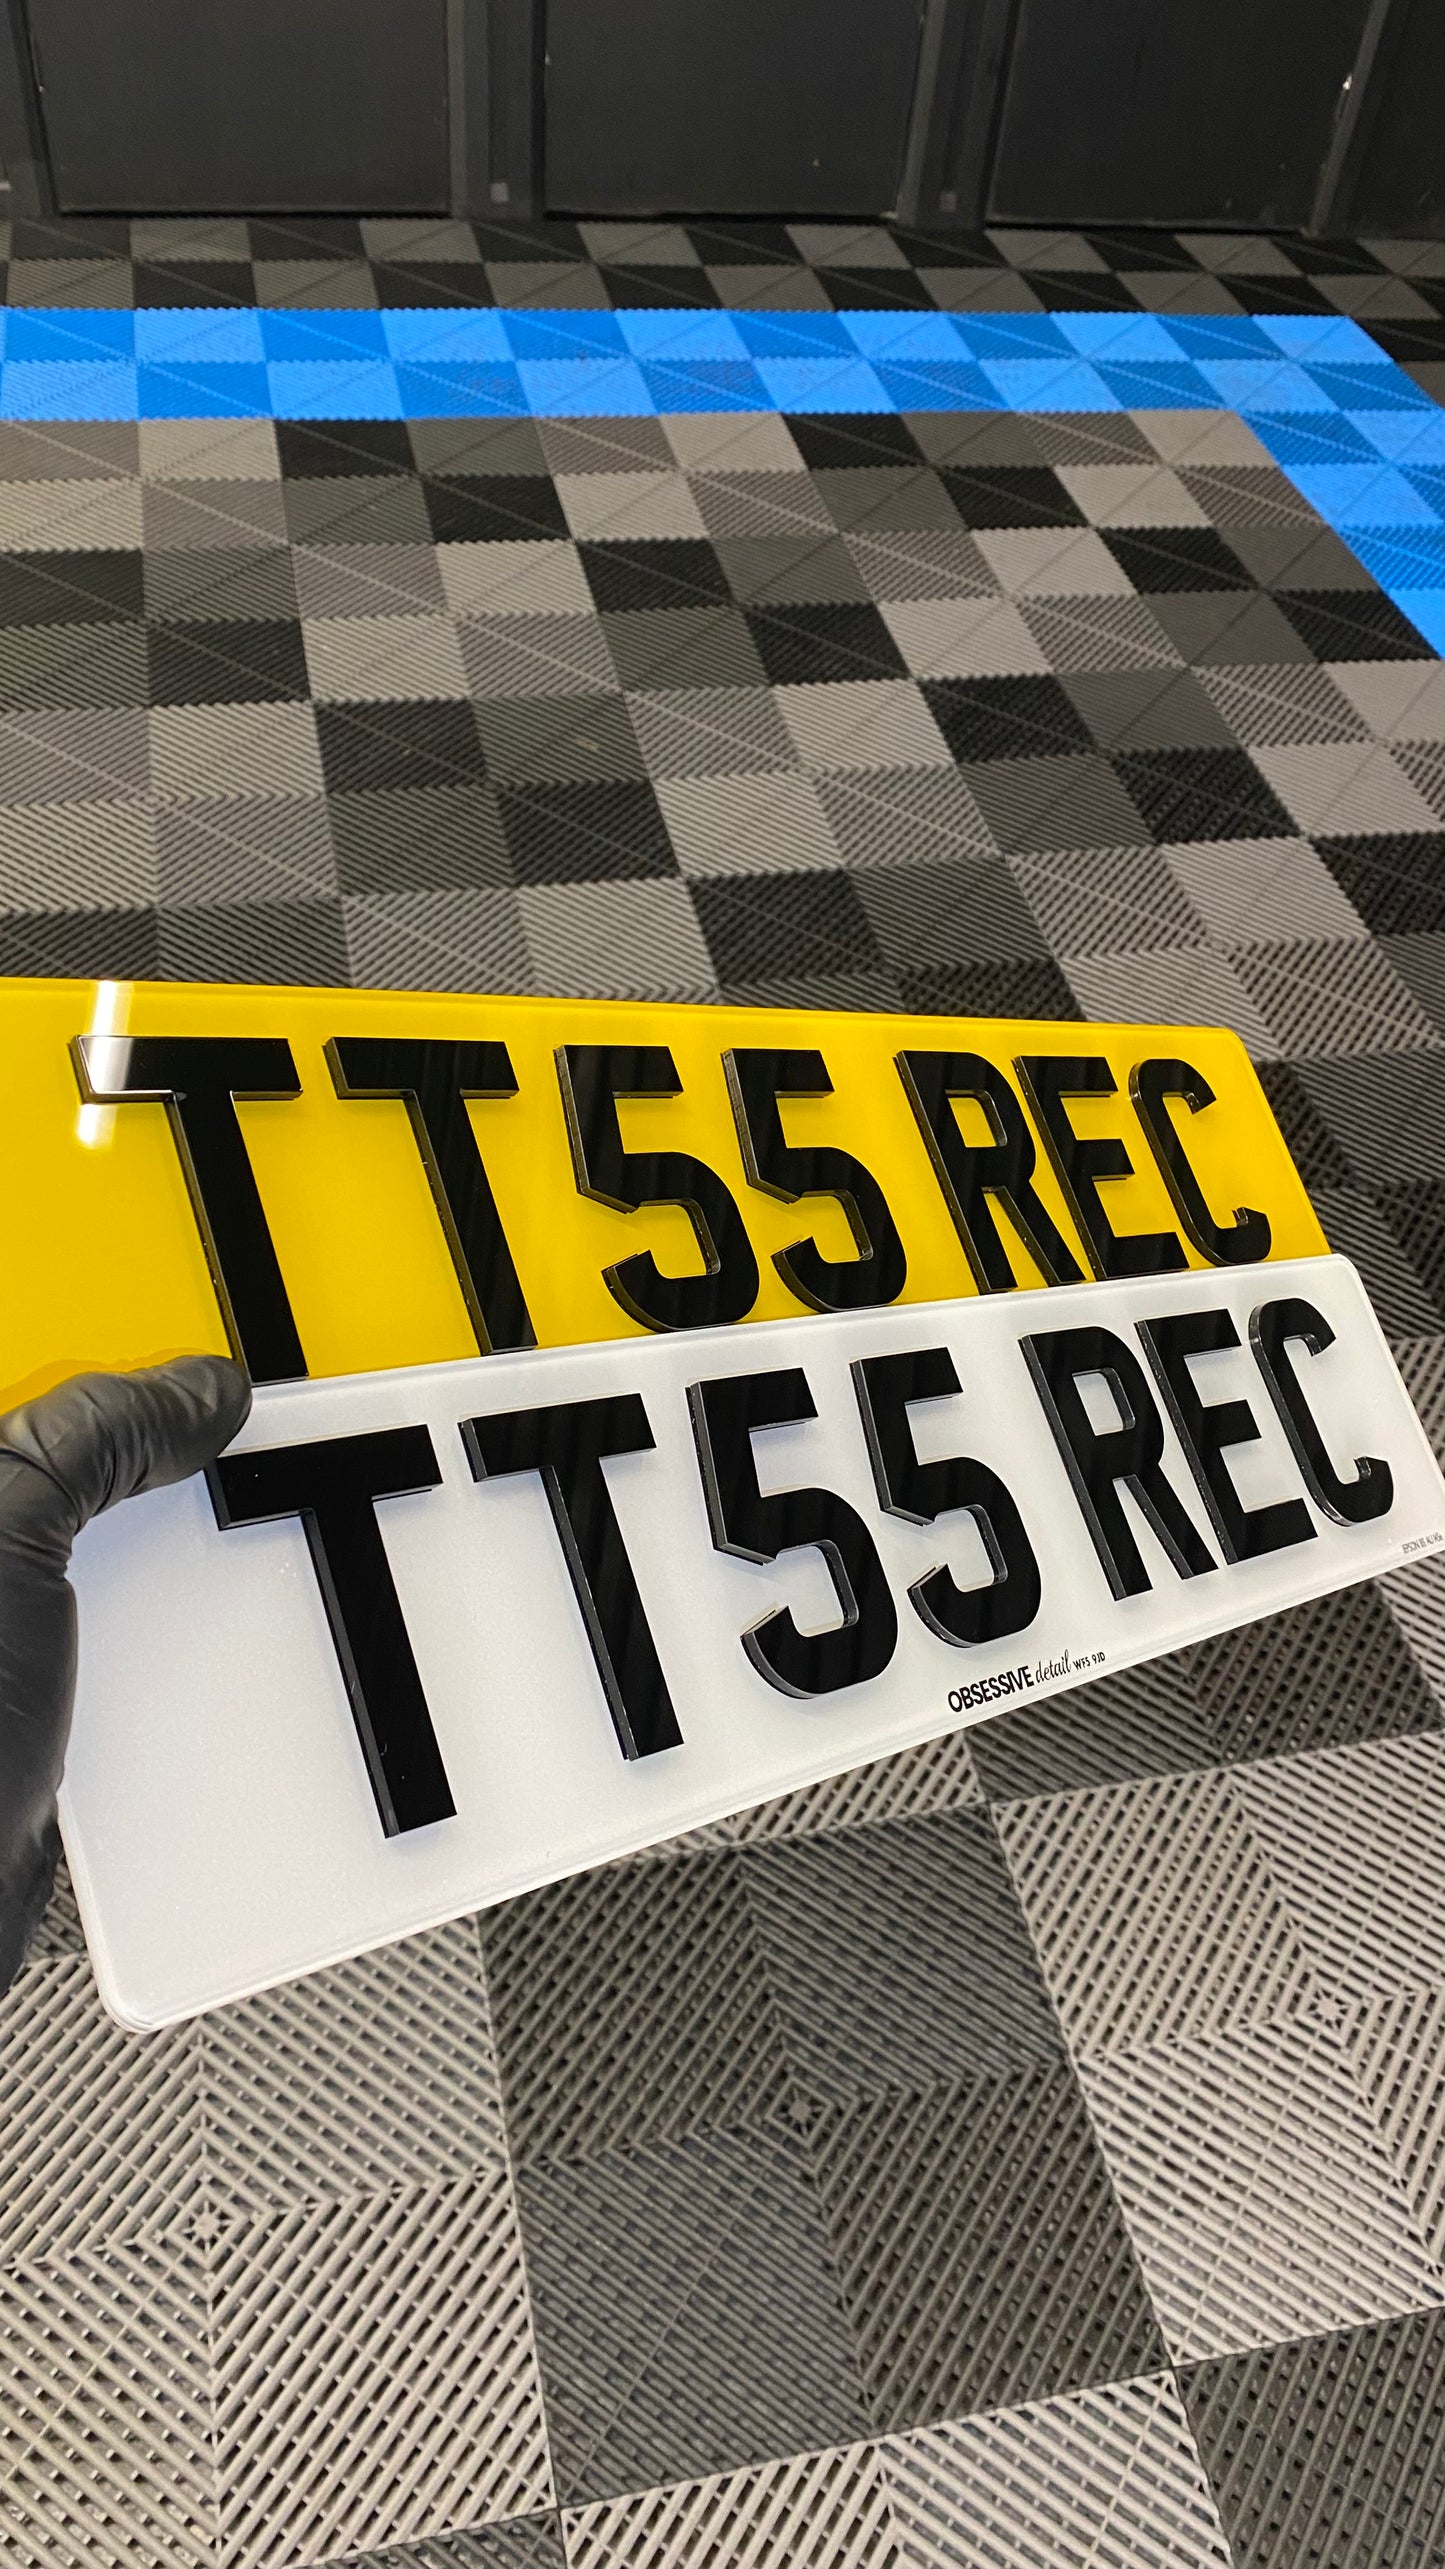 4D Laser Cut Acrylic Number Plates -3mm thick